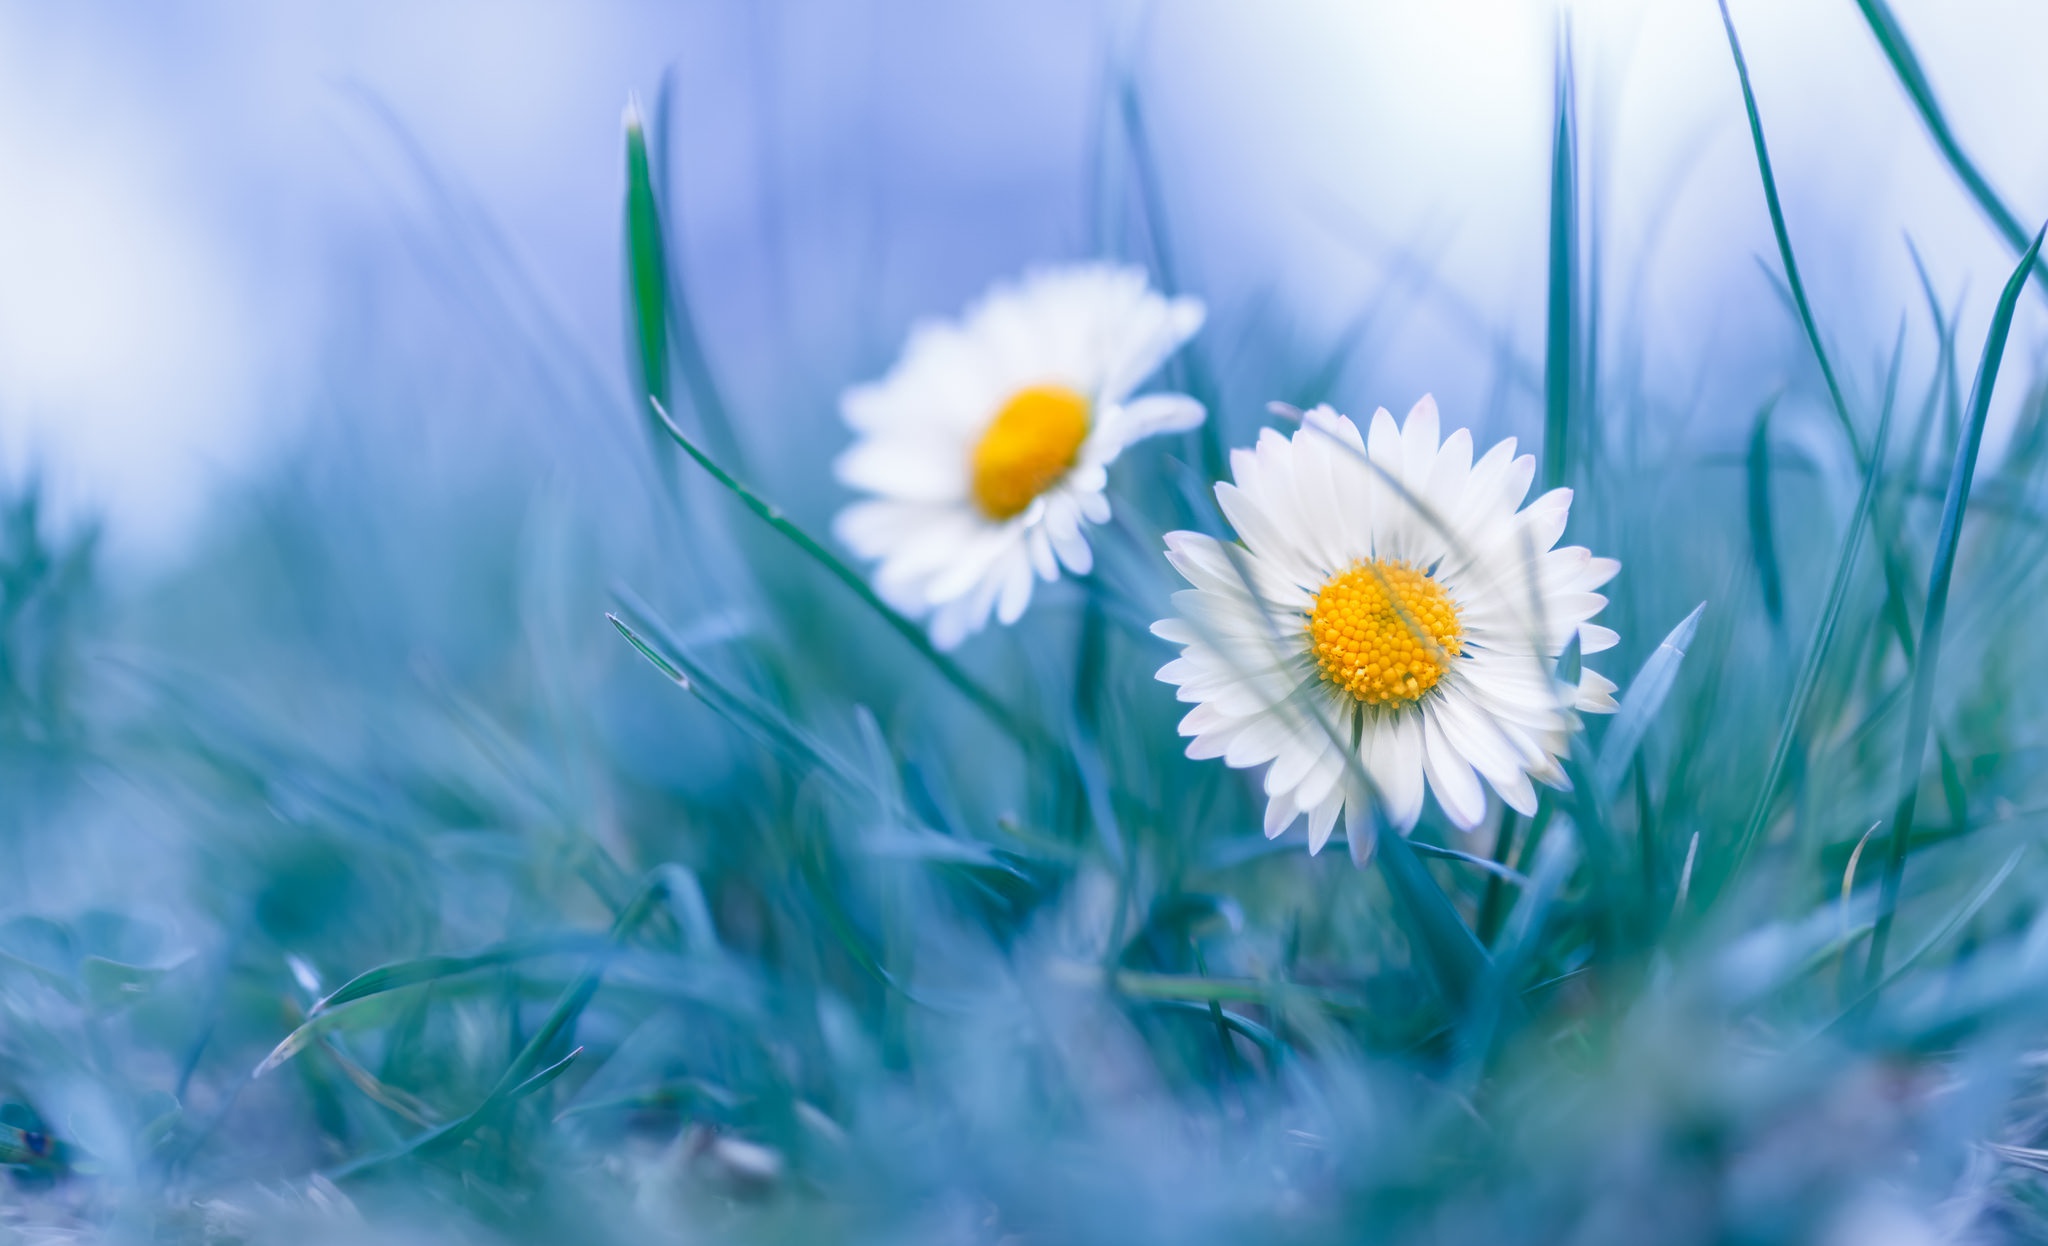 General 2048x1246 daisies flowers plants white flowers